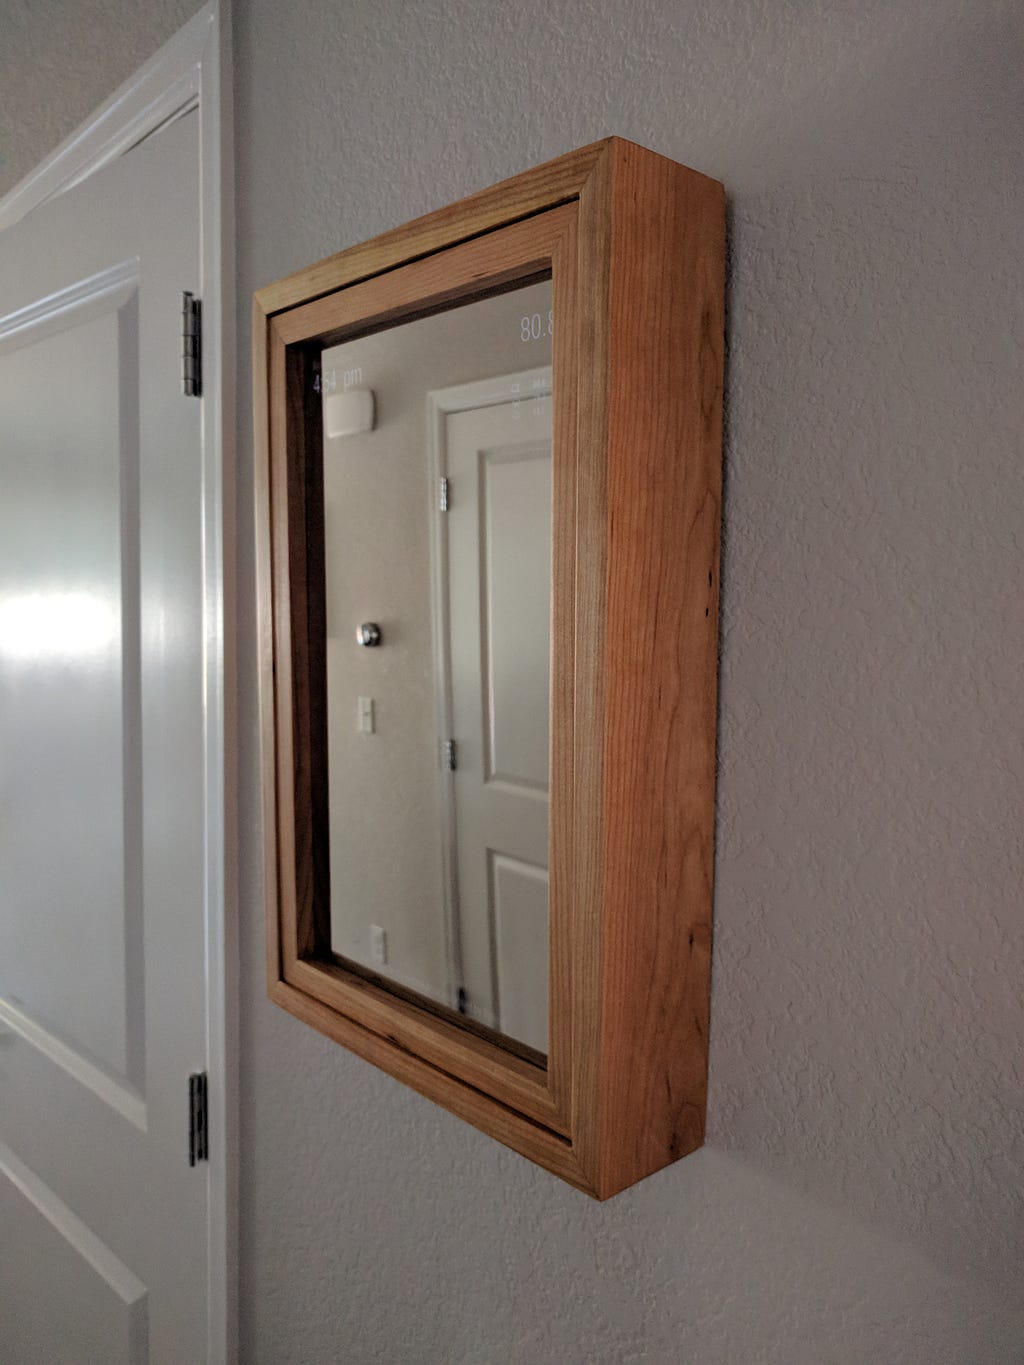 mirror mounted to wall